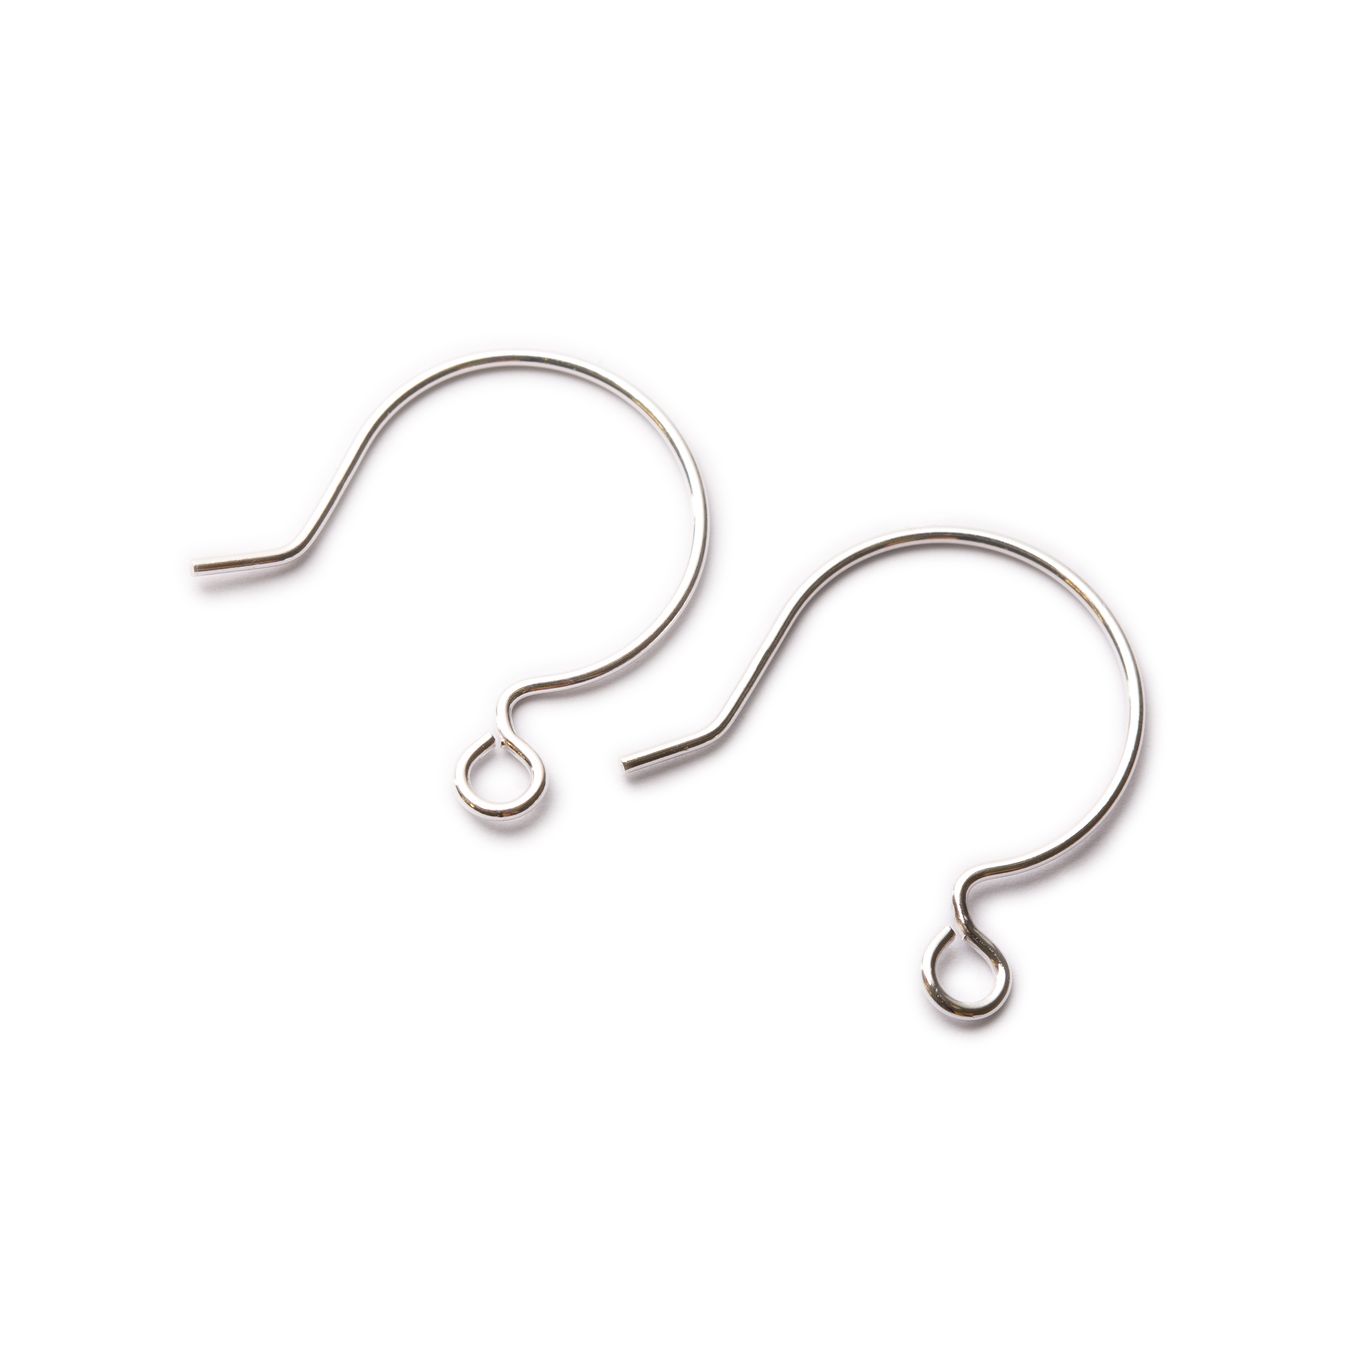 Sterling Silver Plain Rounded Shepherds Crook Earwires With Loop (pair)